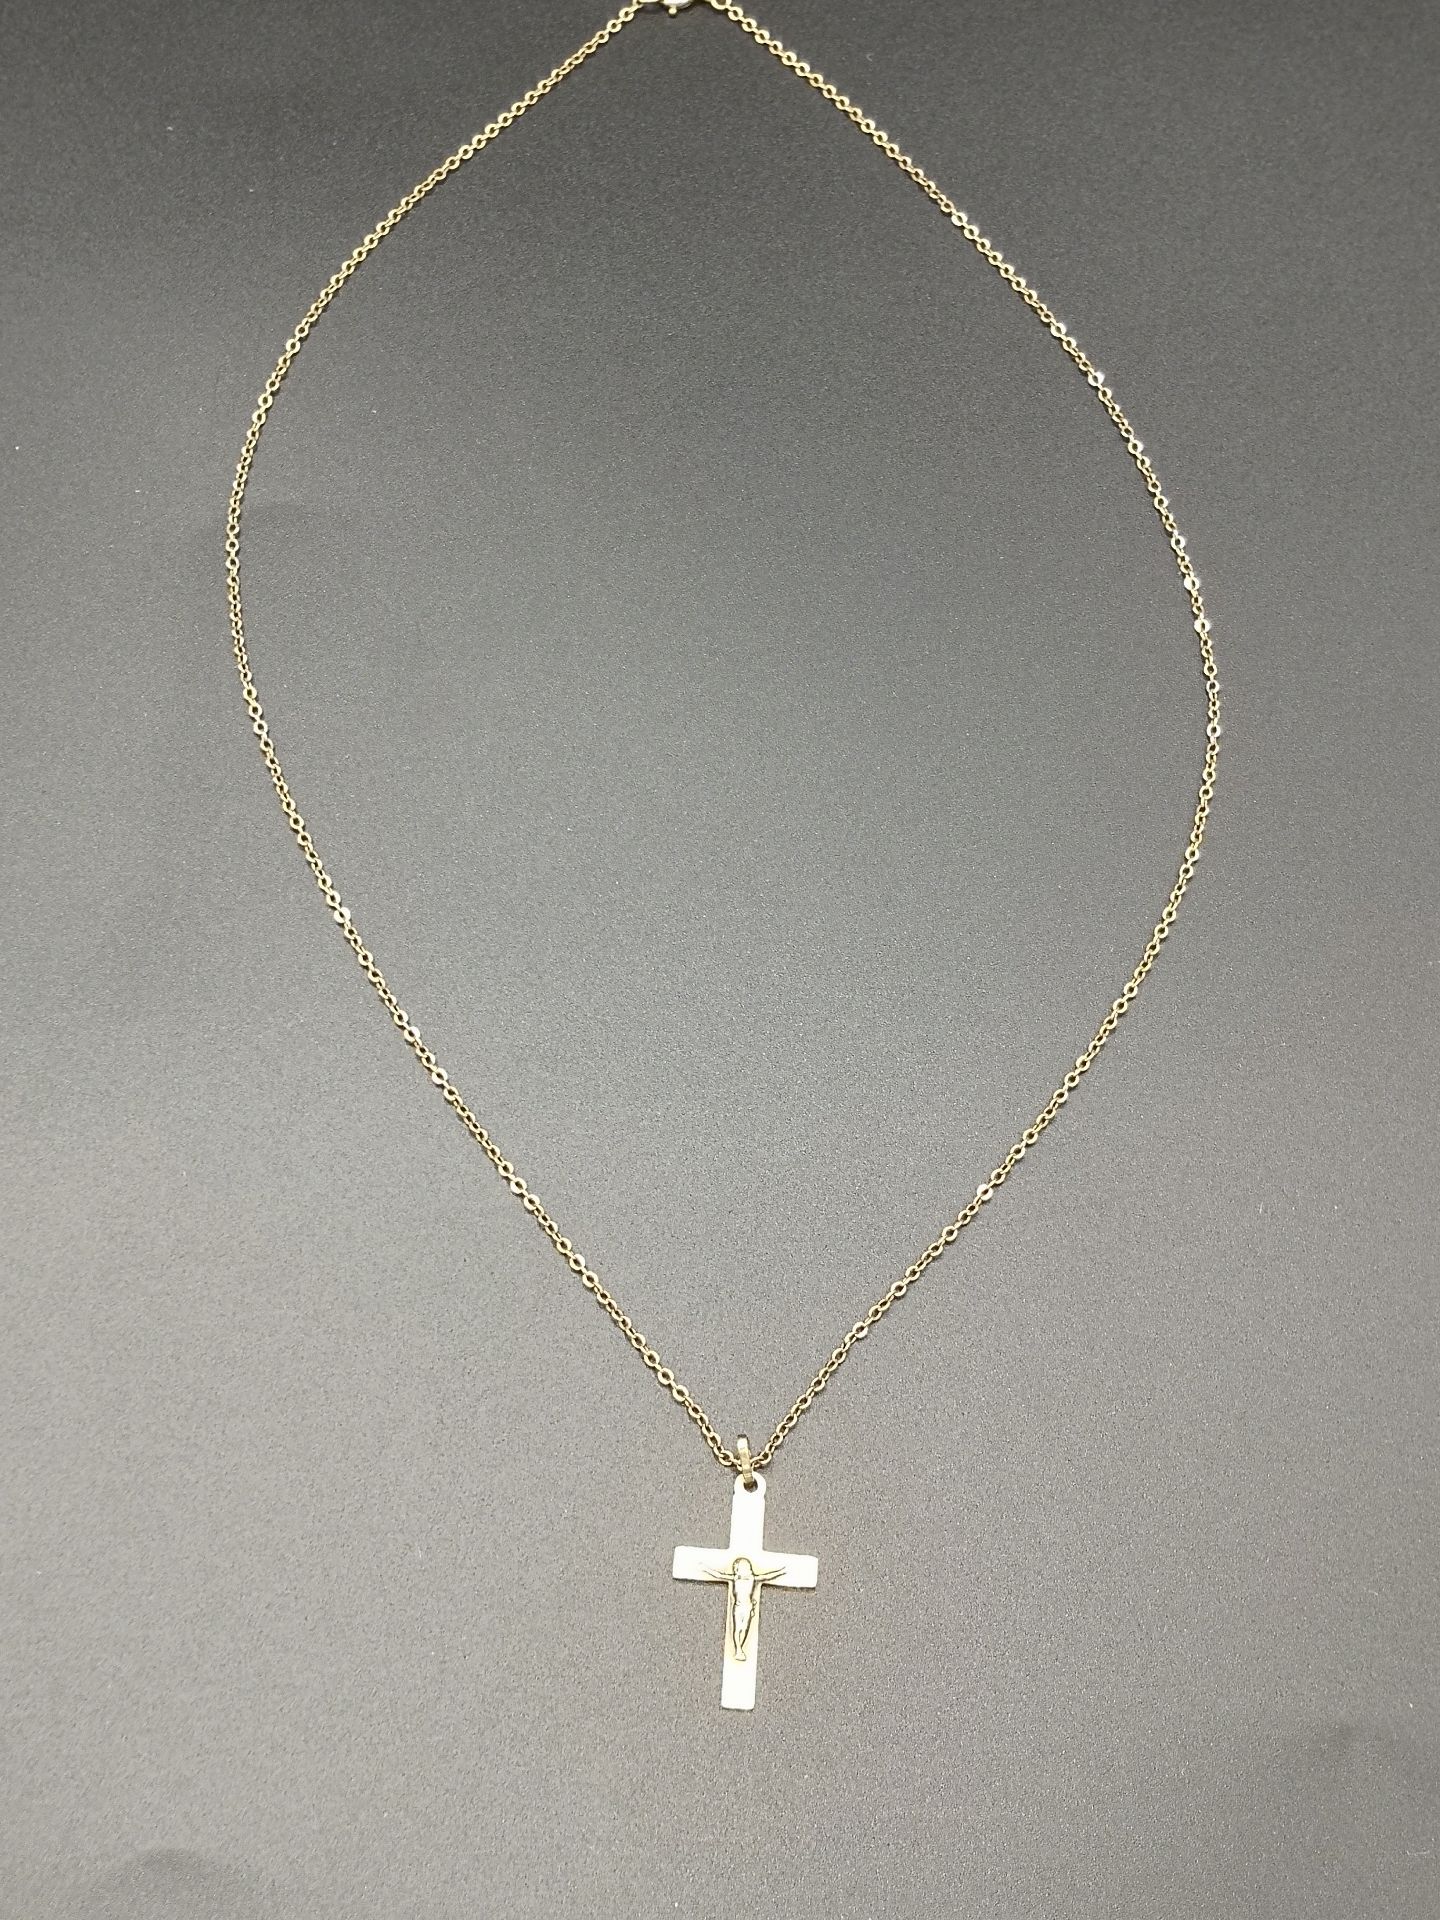 9ct gold necklace with crucifix pendant